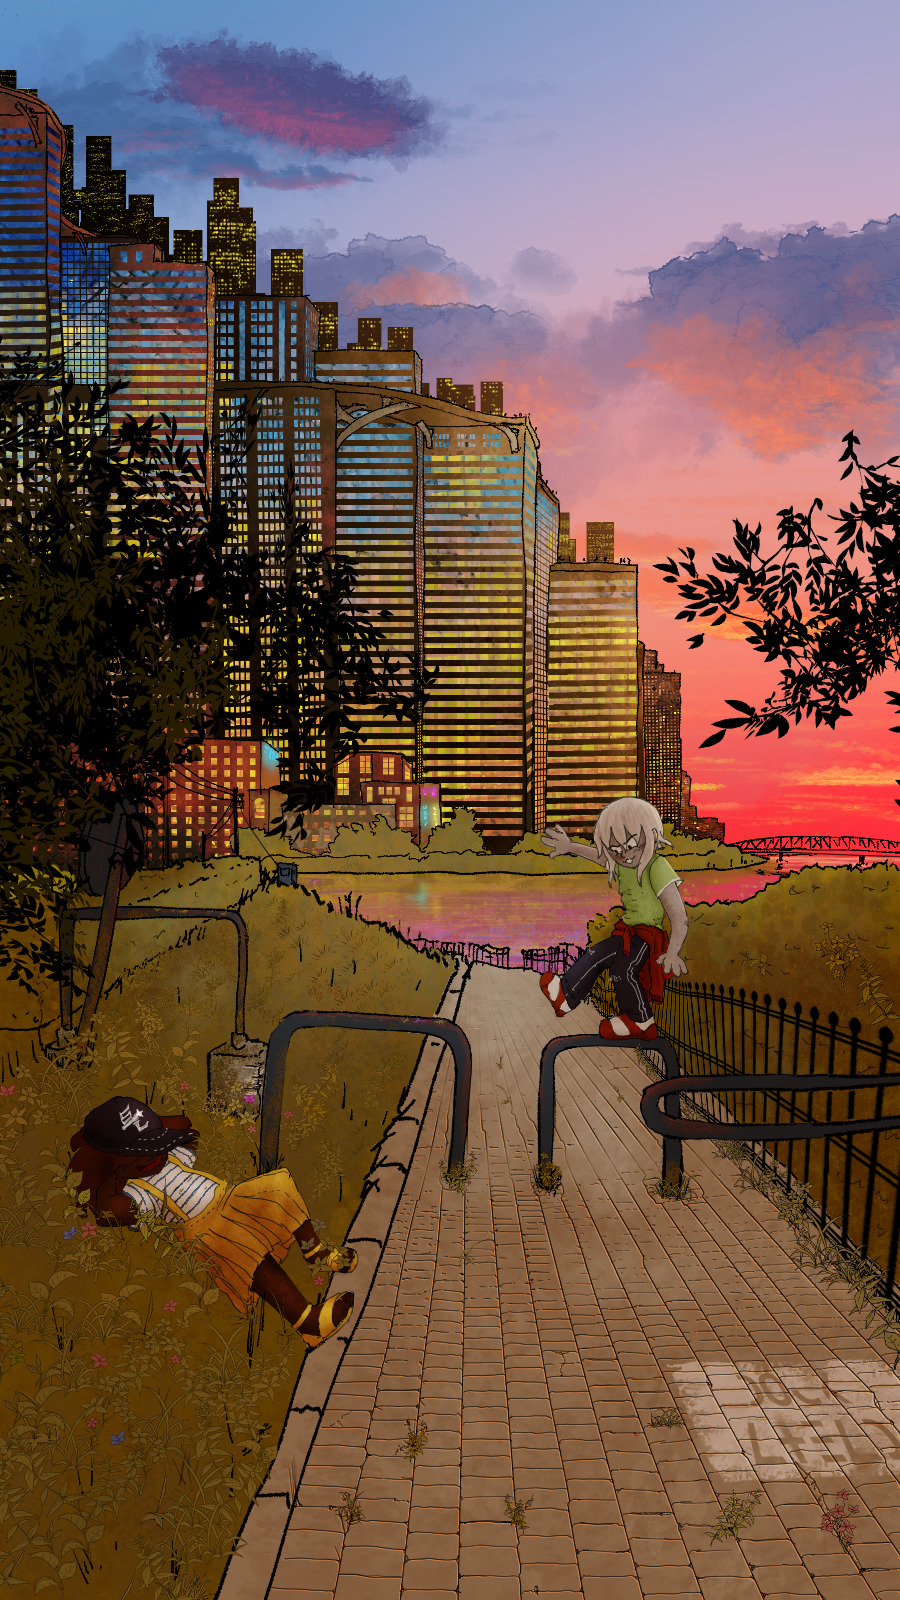 A picture of Feryuu and Amy. Amy is lying down in the grass on the side of the path. Feryuu is balancing on metal bars. Cape Namida can be seen in the background. It is dusk.